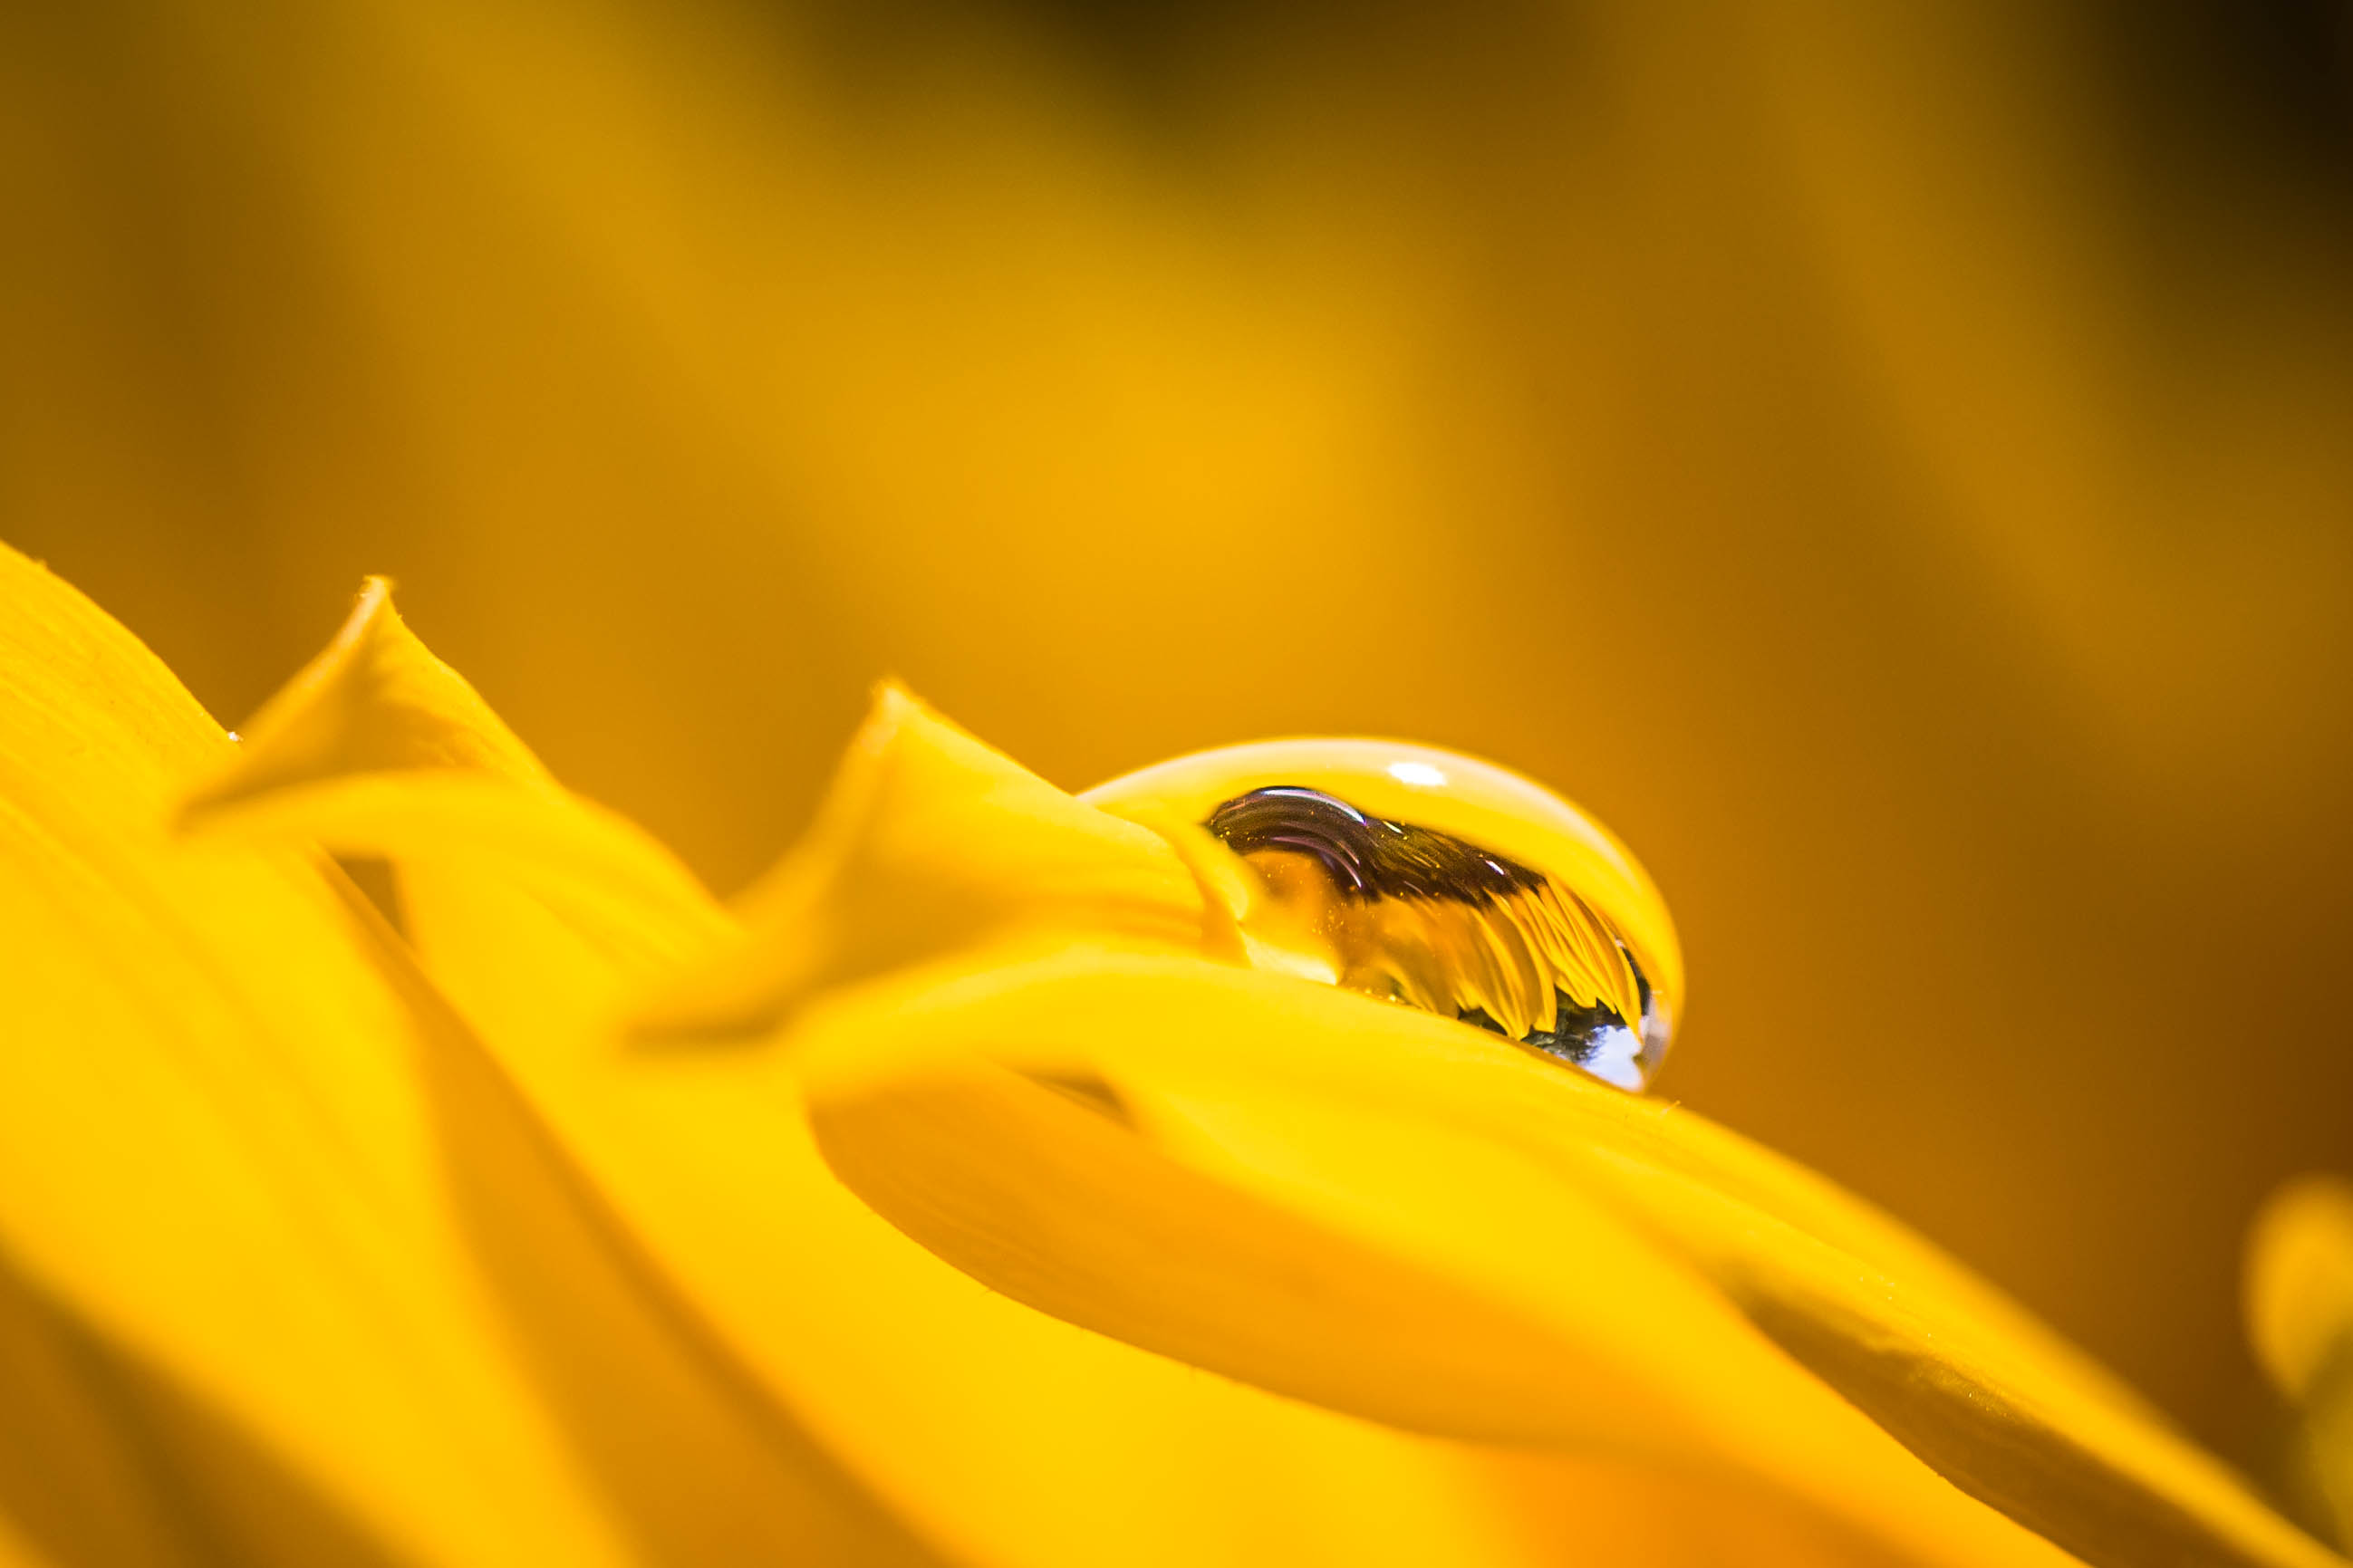 _MG_5693Sunflower Droplet.jpg undefined by WPC-187